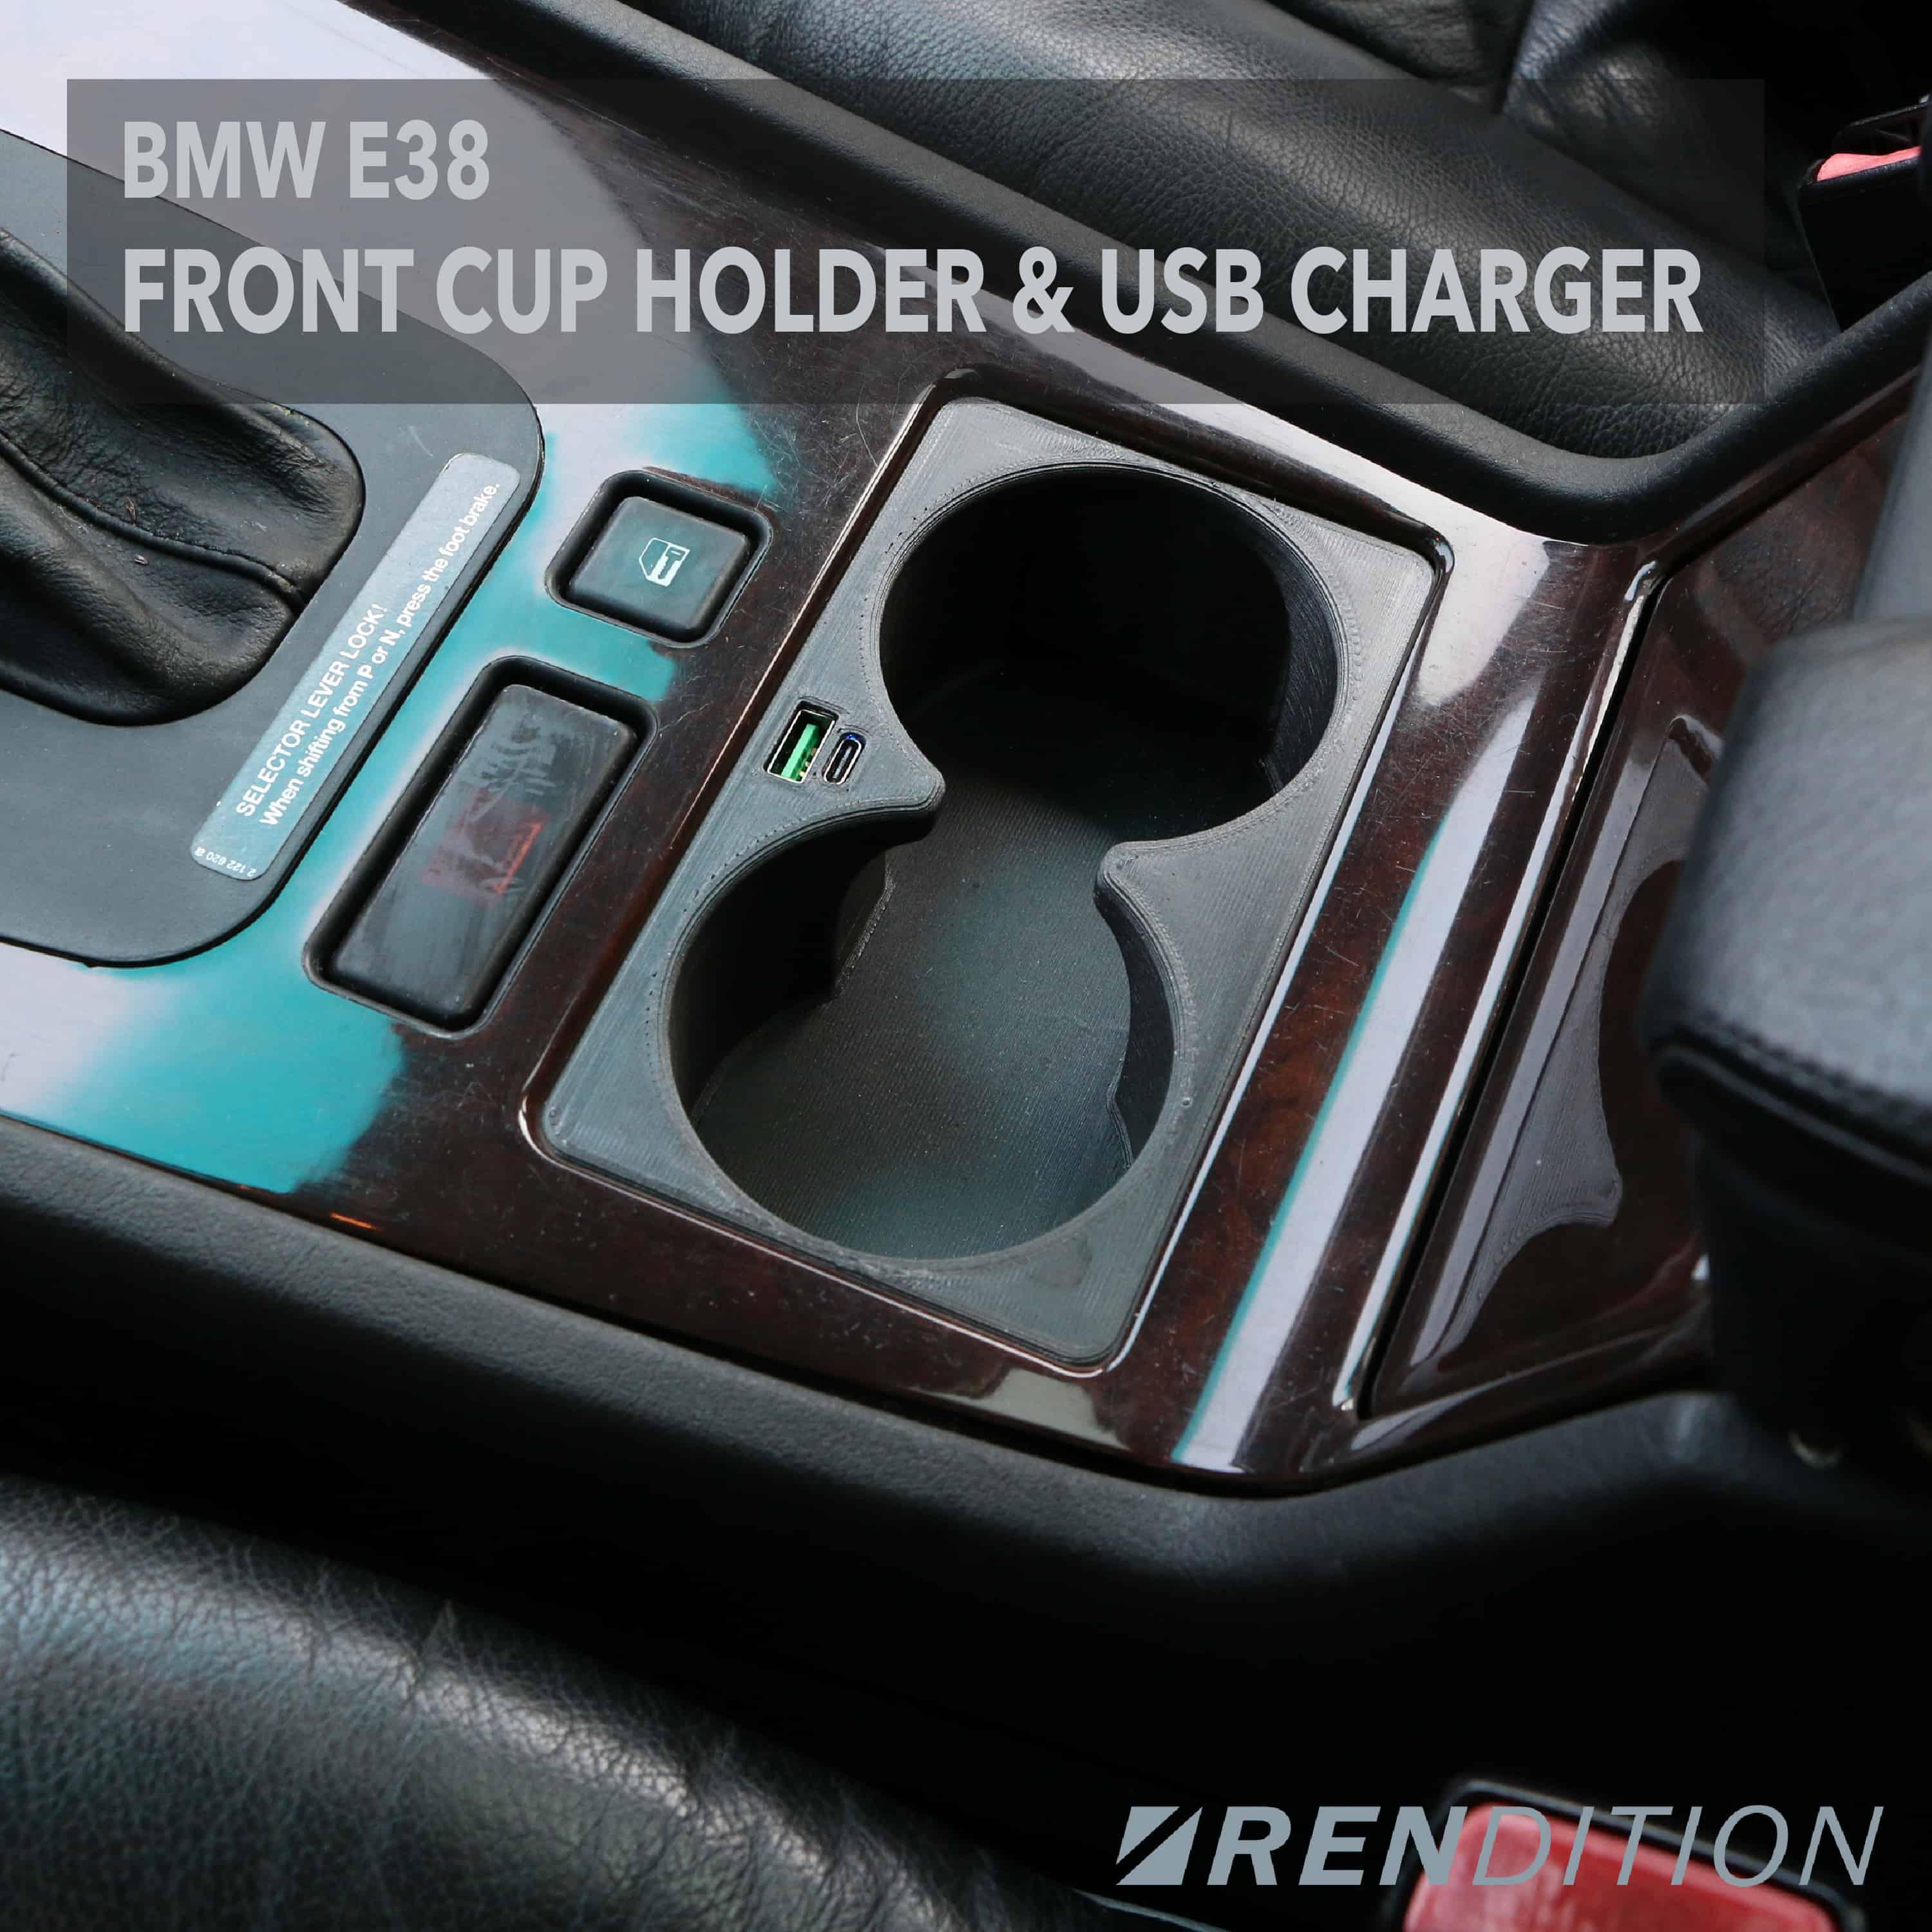 BMW E38 FRONT CUP HOLDER & USB CHARGER - K2 Industries